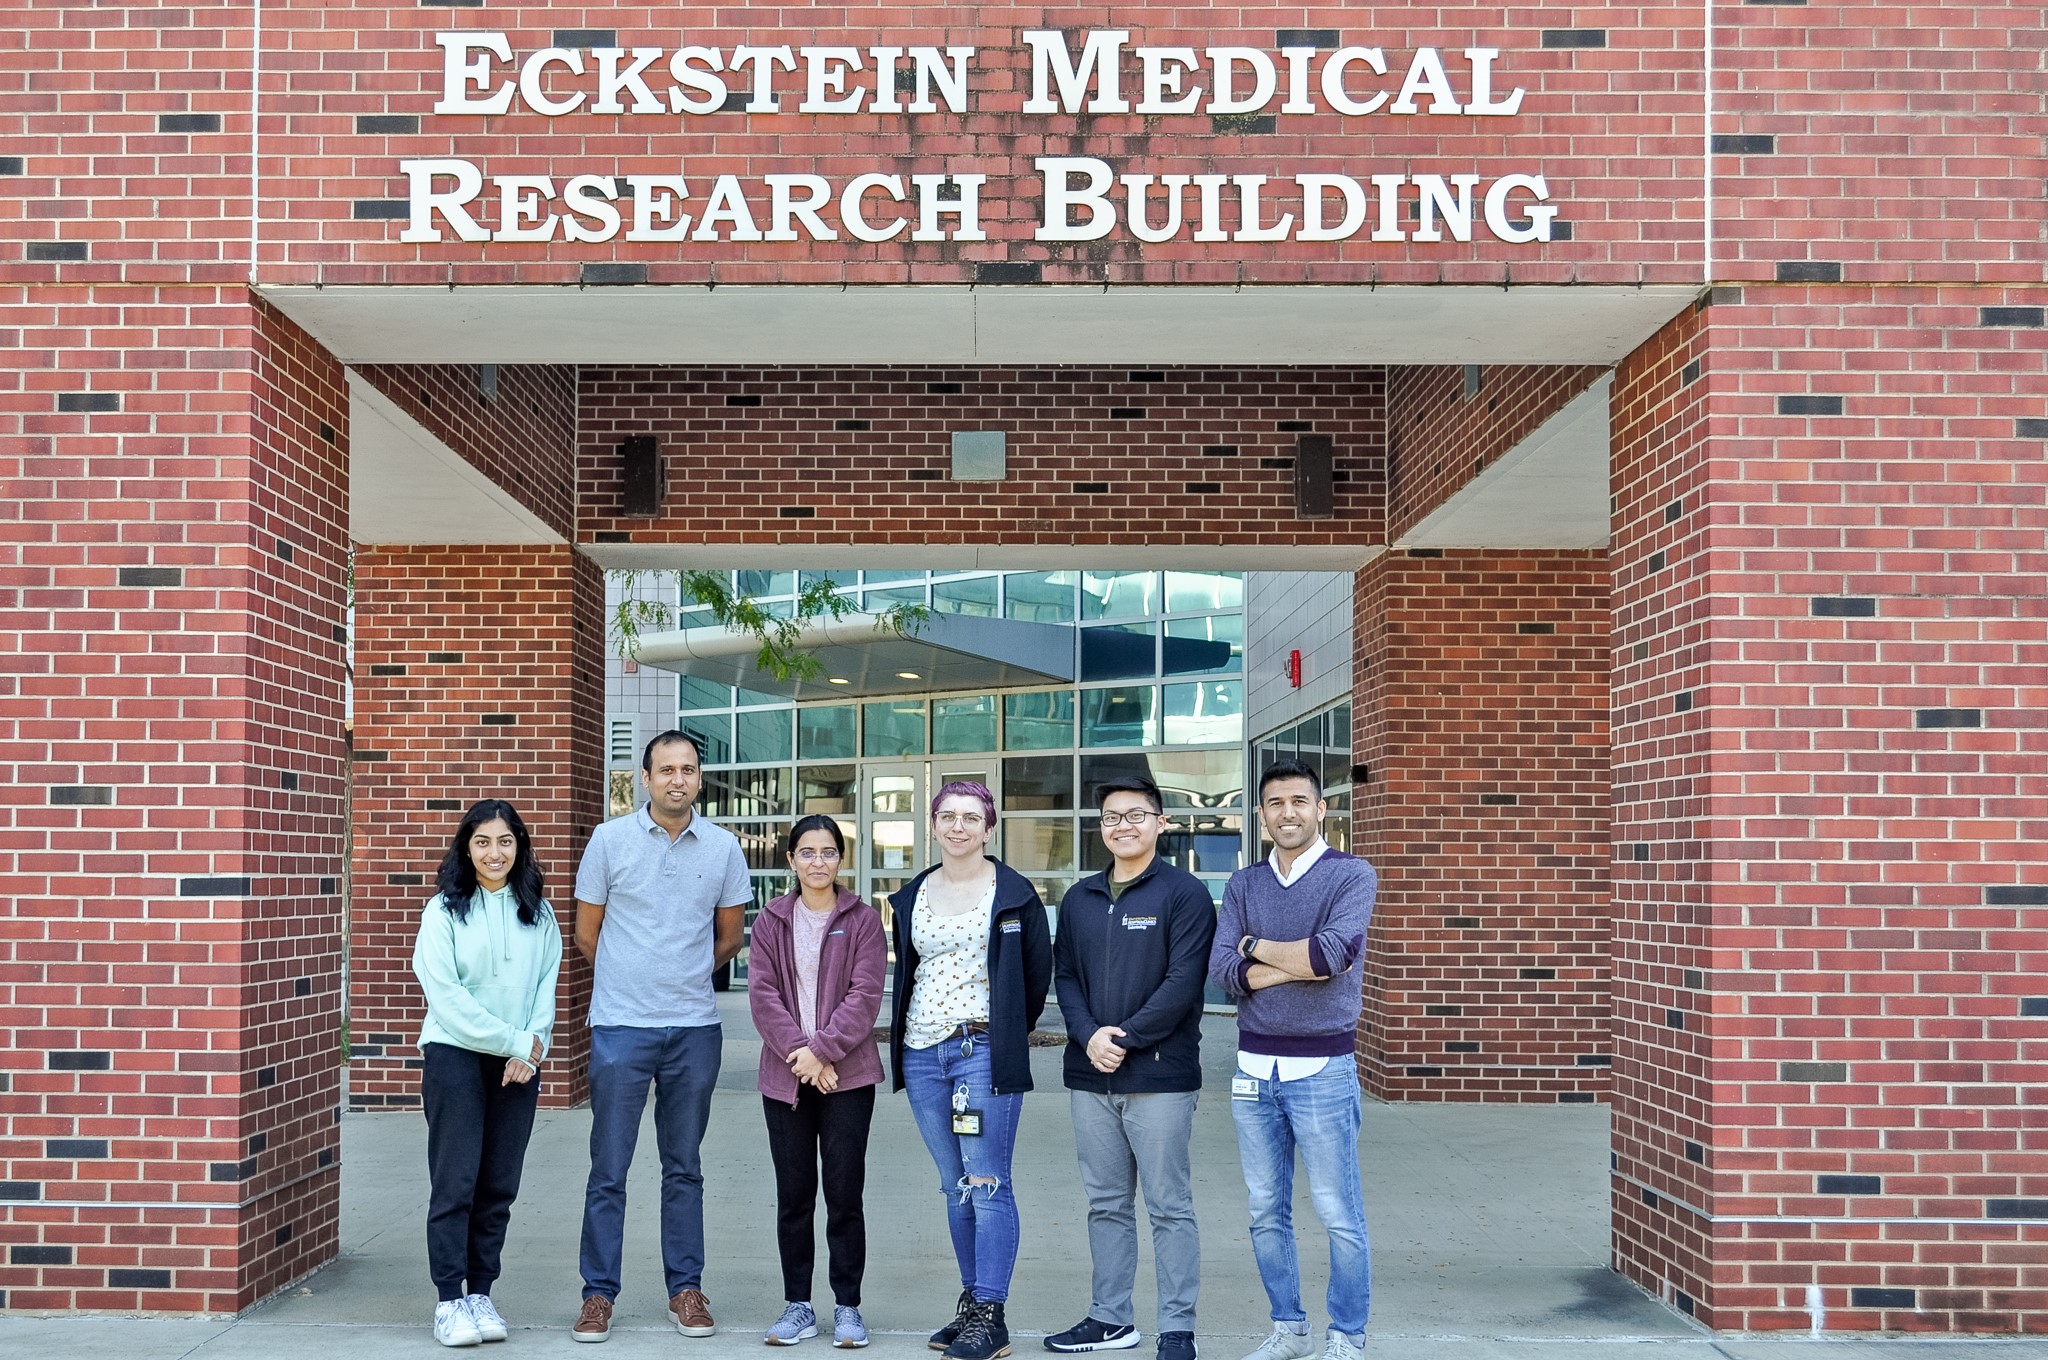 Members of Dr. Chaurasia's lab in front of Eckstein Medical Research Building.